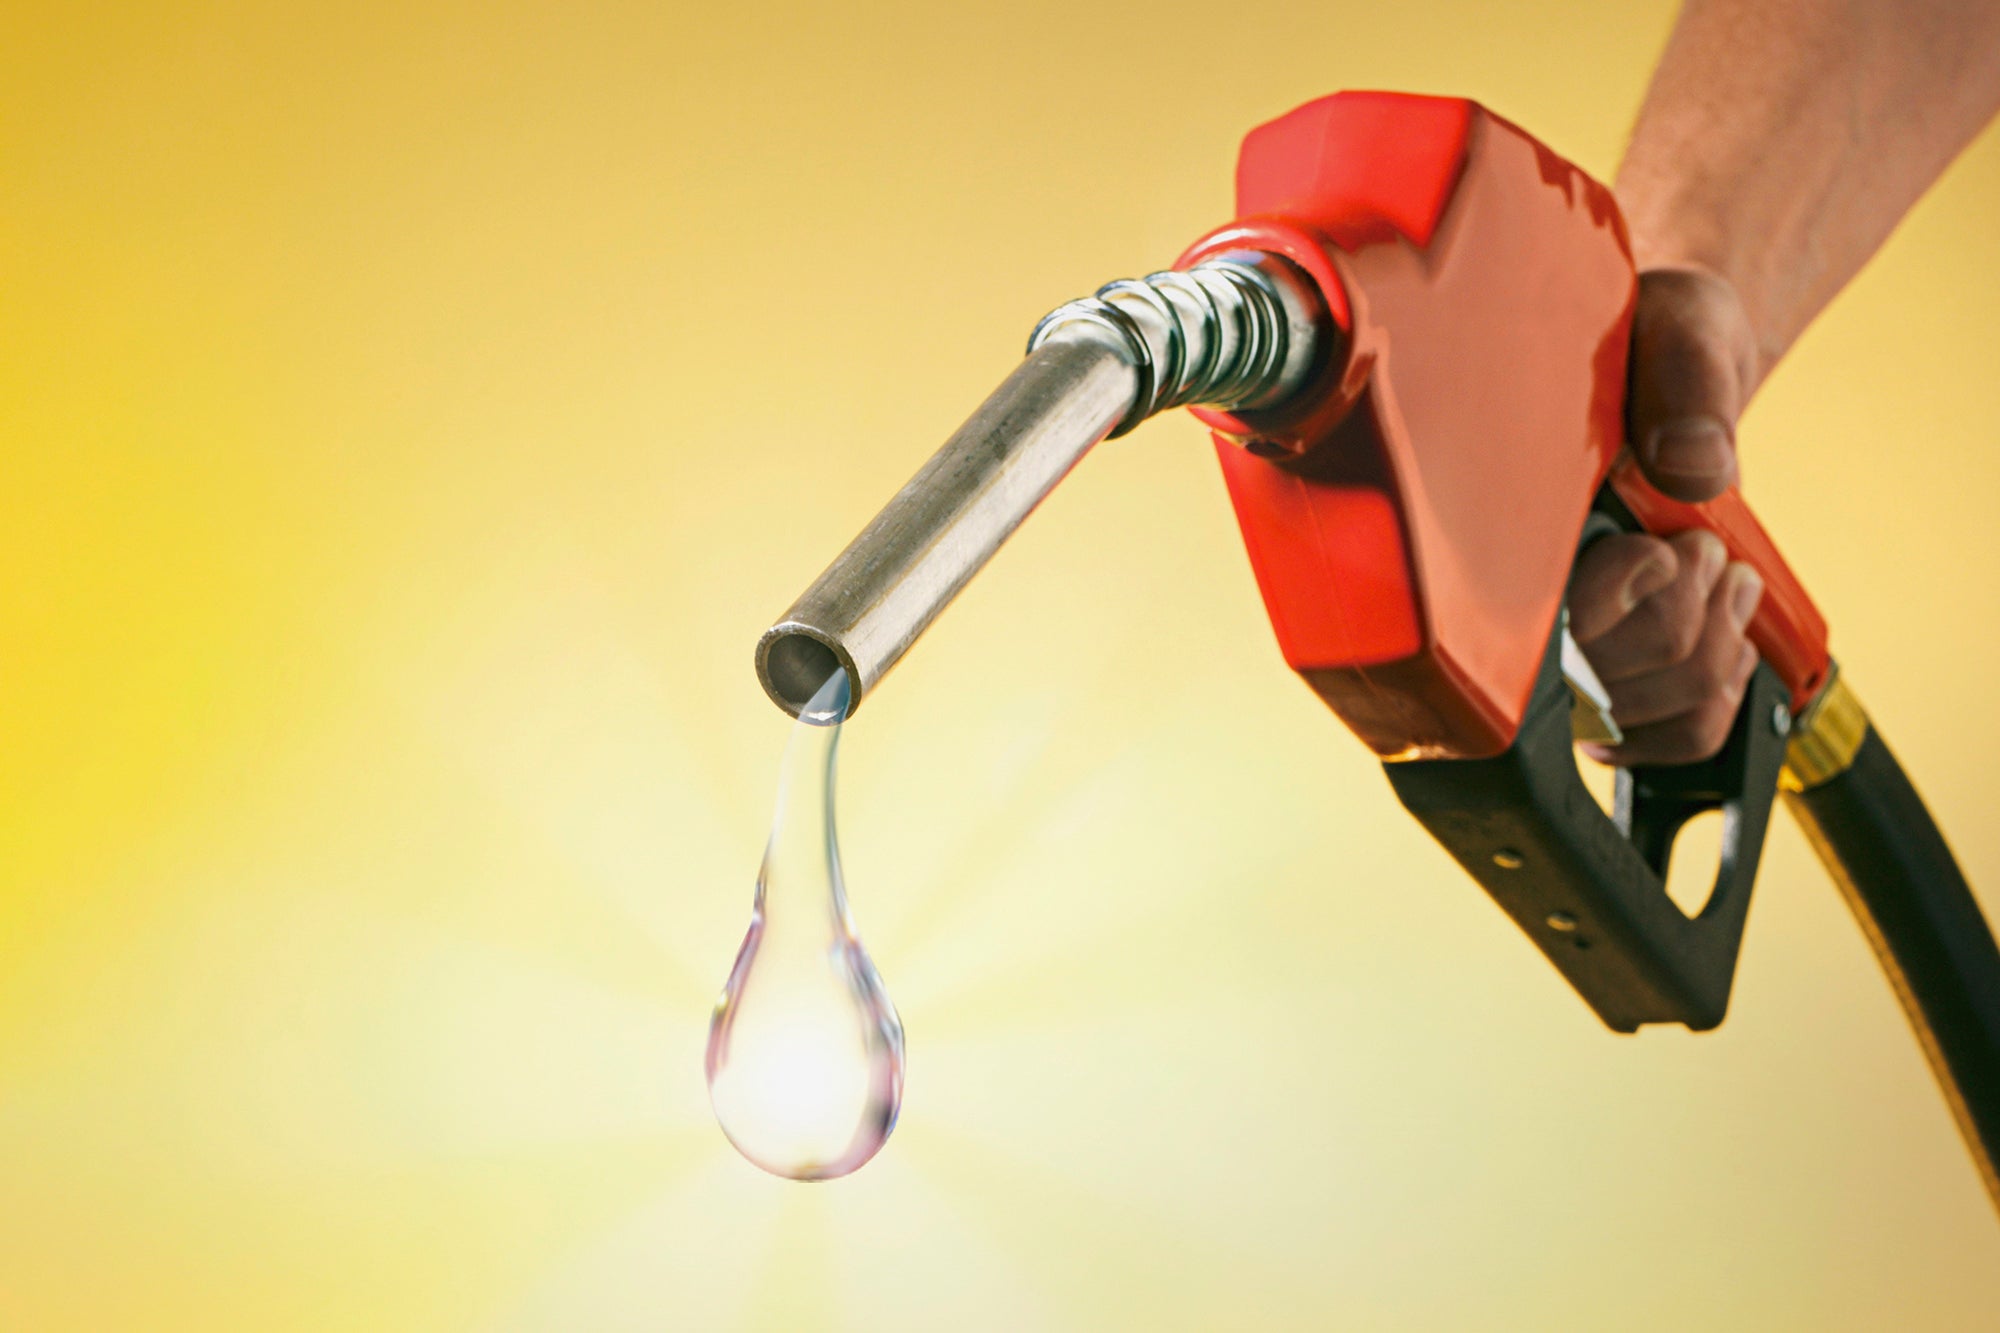 A still-life photograph showing a hand holding a gas pump with a perfectly formed drip of as emerging from the pump nozzle.